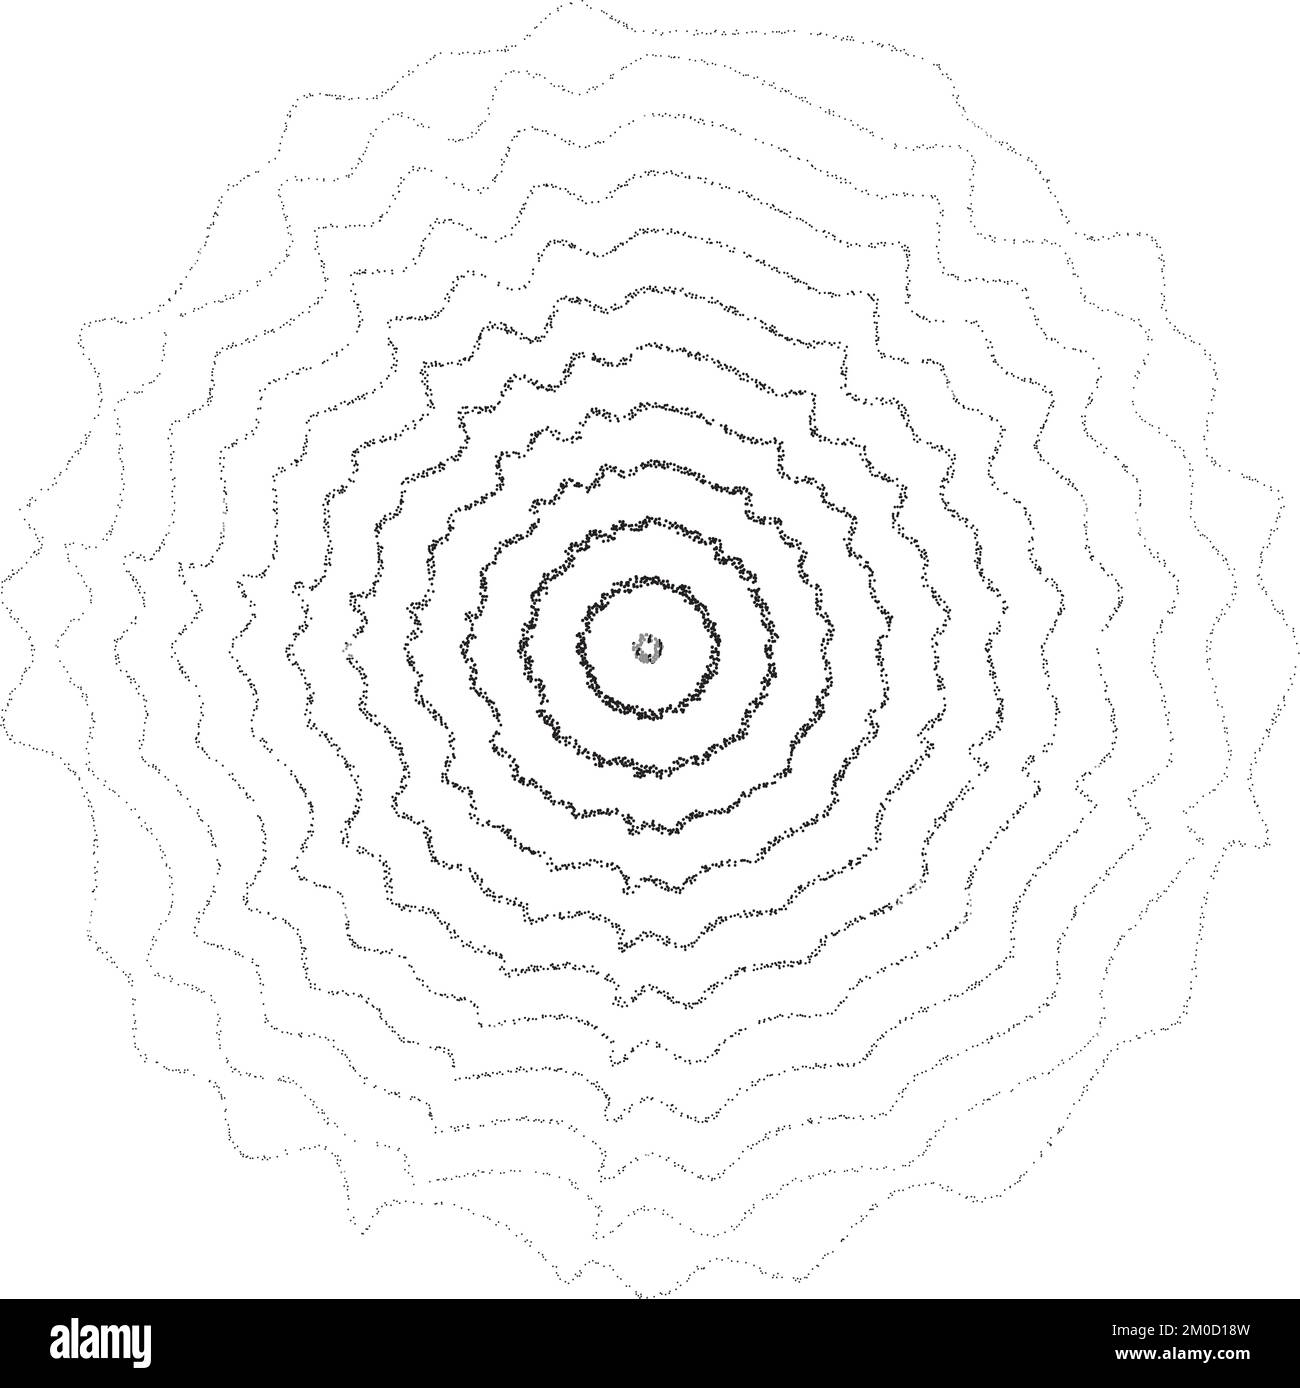 Texture concentric ripple circles set. Sonar or sound wave rings collection. Epicentre, target, radar icon concept. Radial signal or vibration Stock Vector